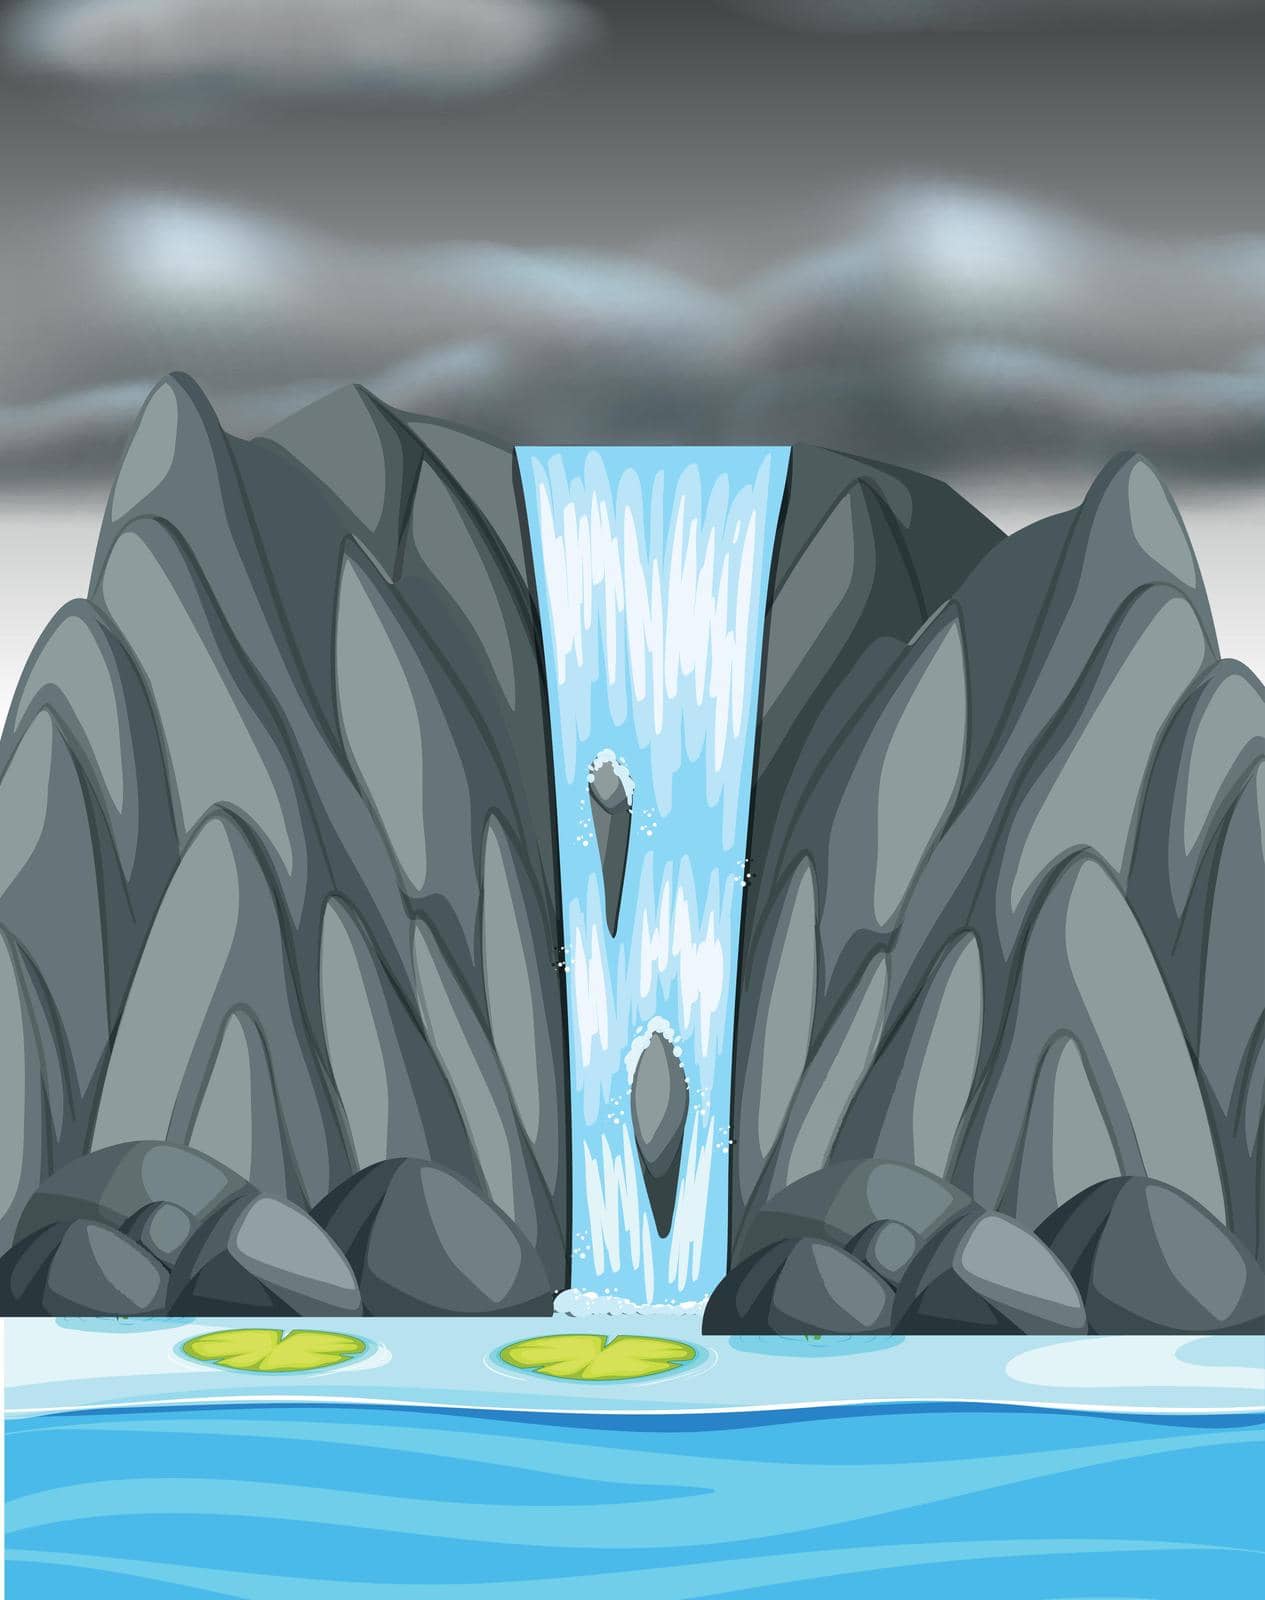 Waterfall with dark stormy clouds illustration